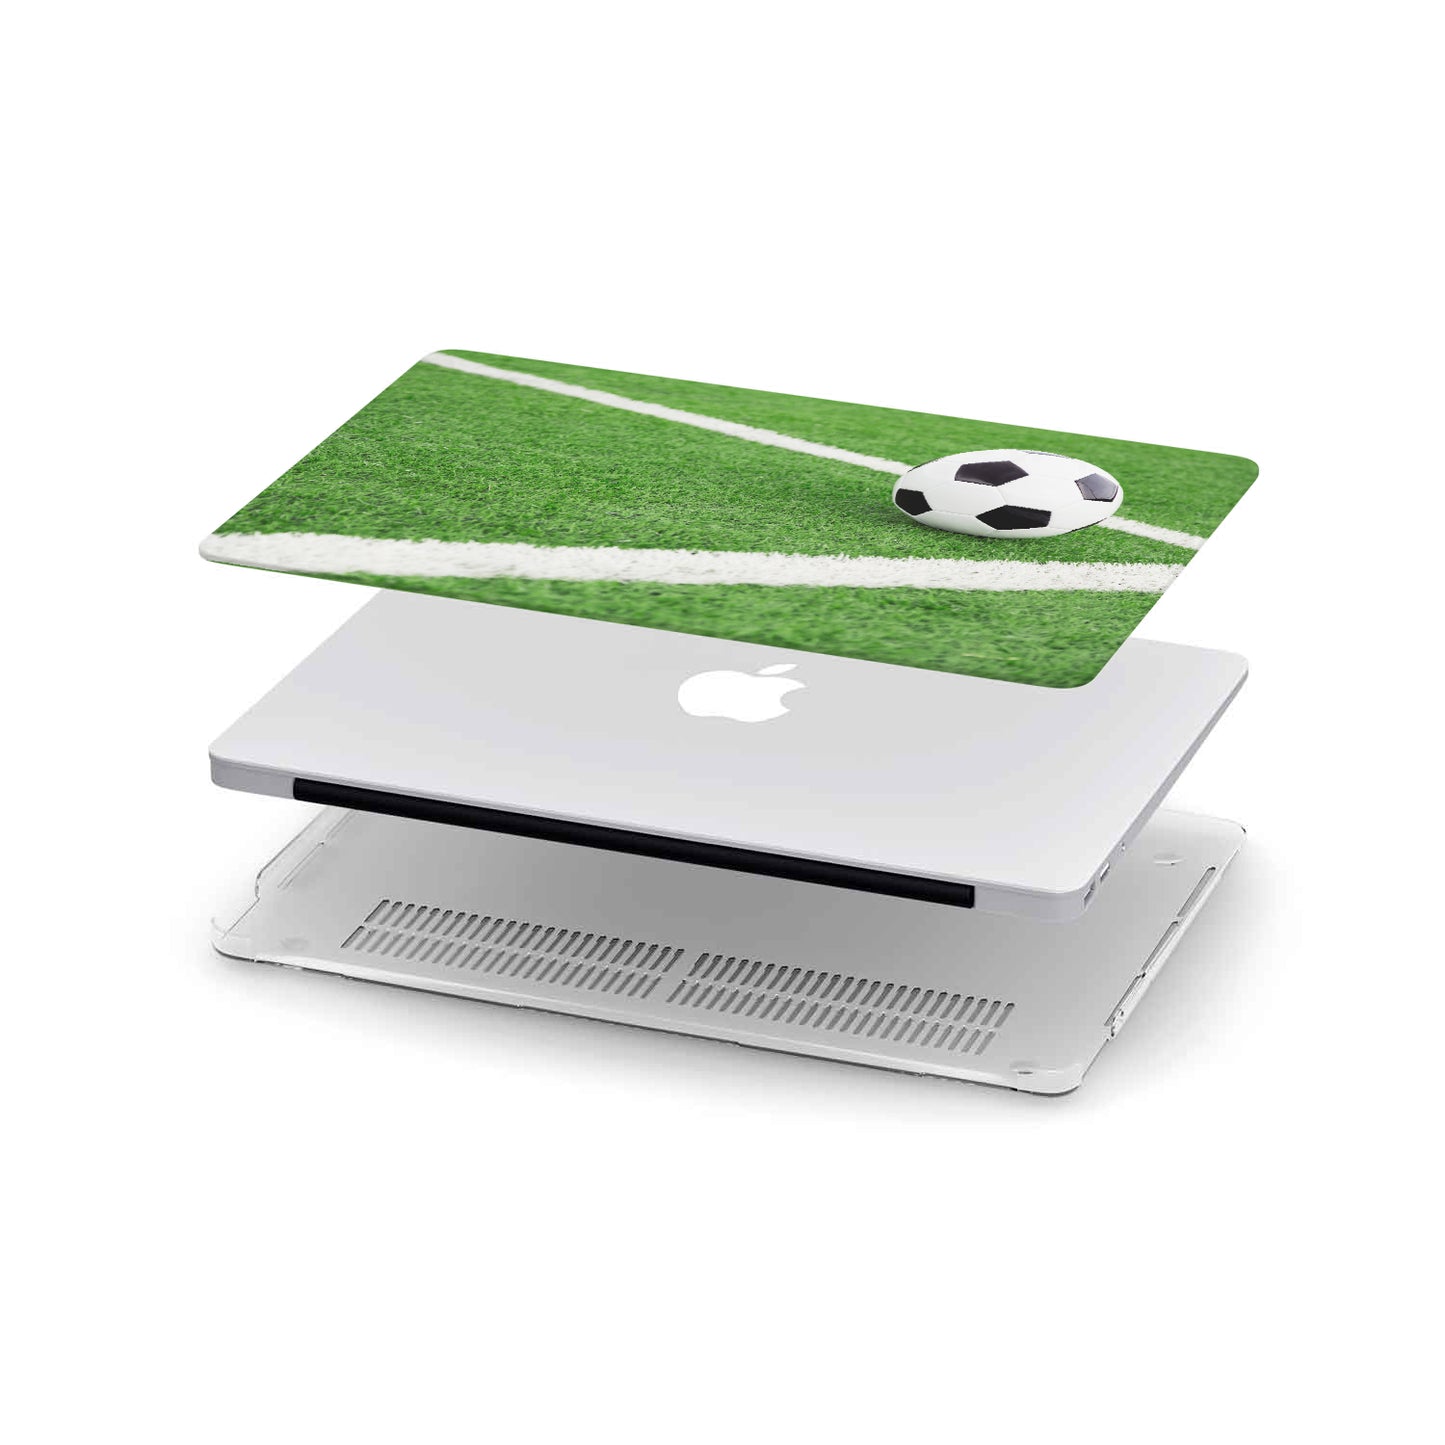 Personalized Macbook Hard Shell Case - Soccer Ball / Football